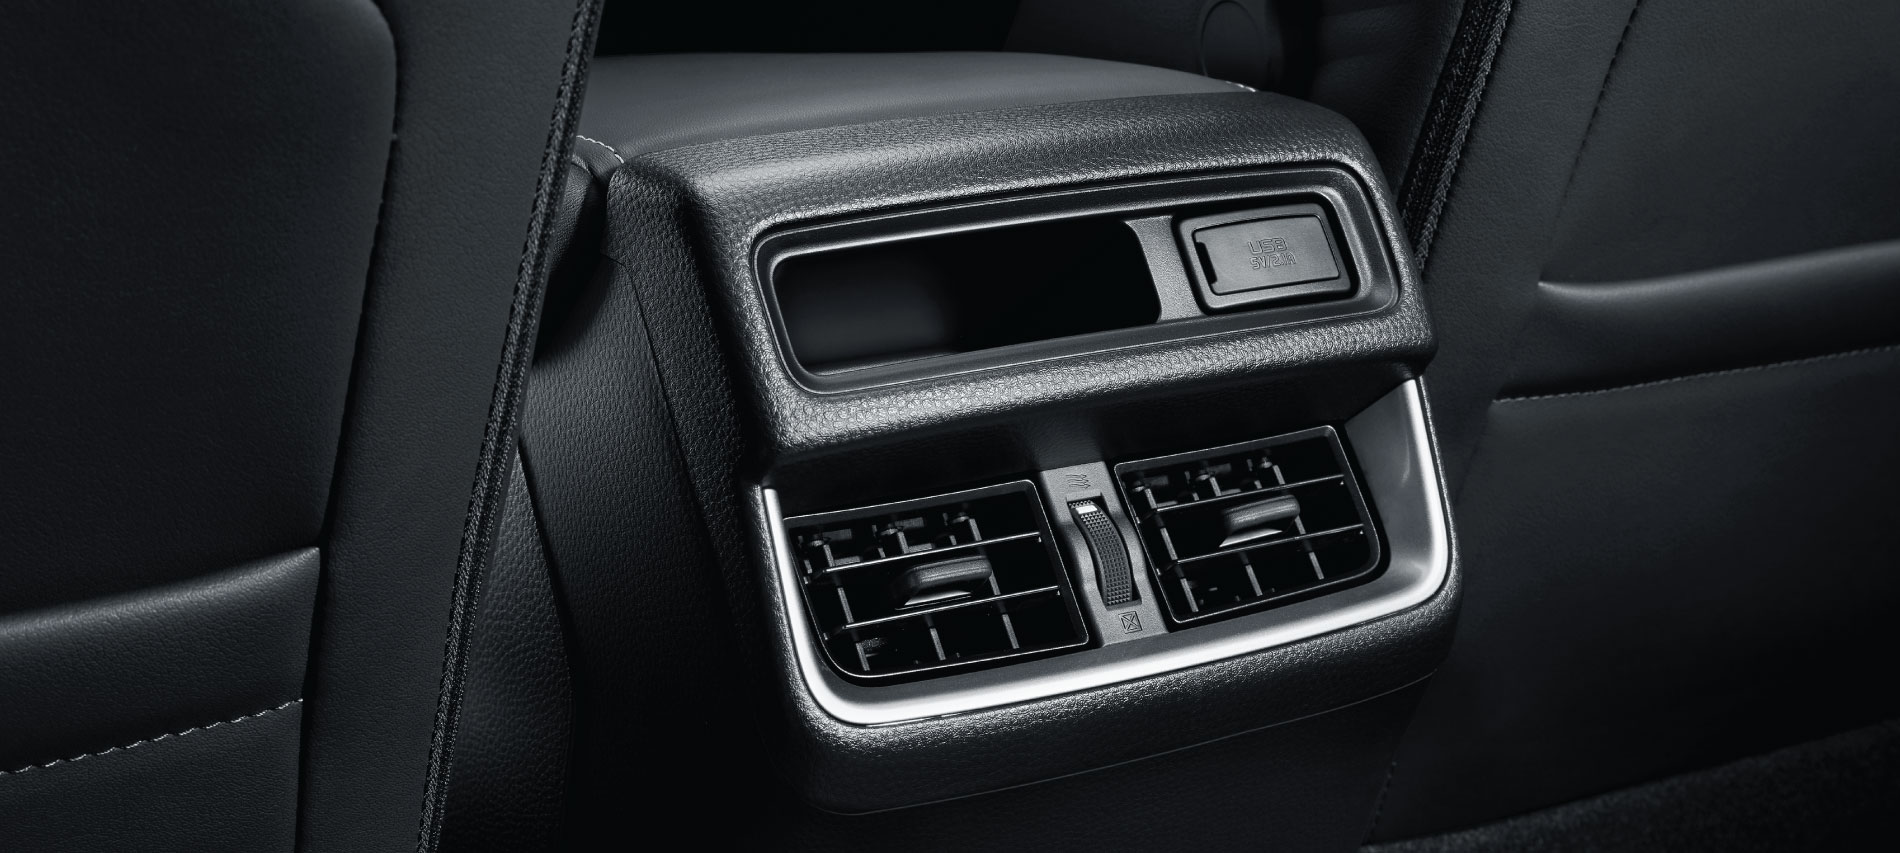 REAR VENTS WITH USB CHARGING PORT